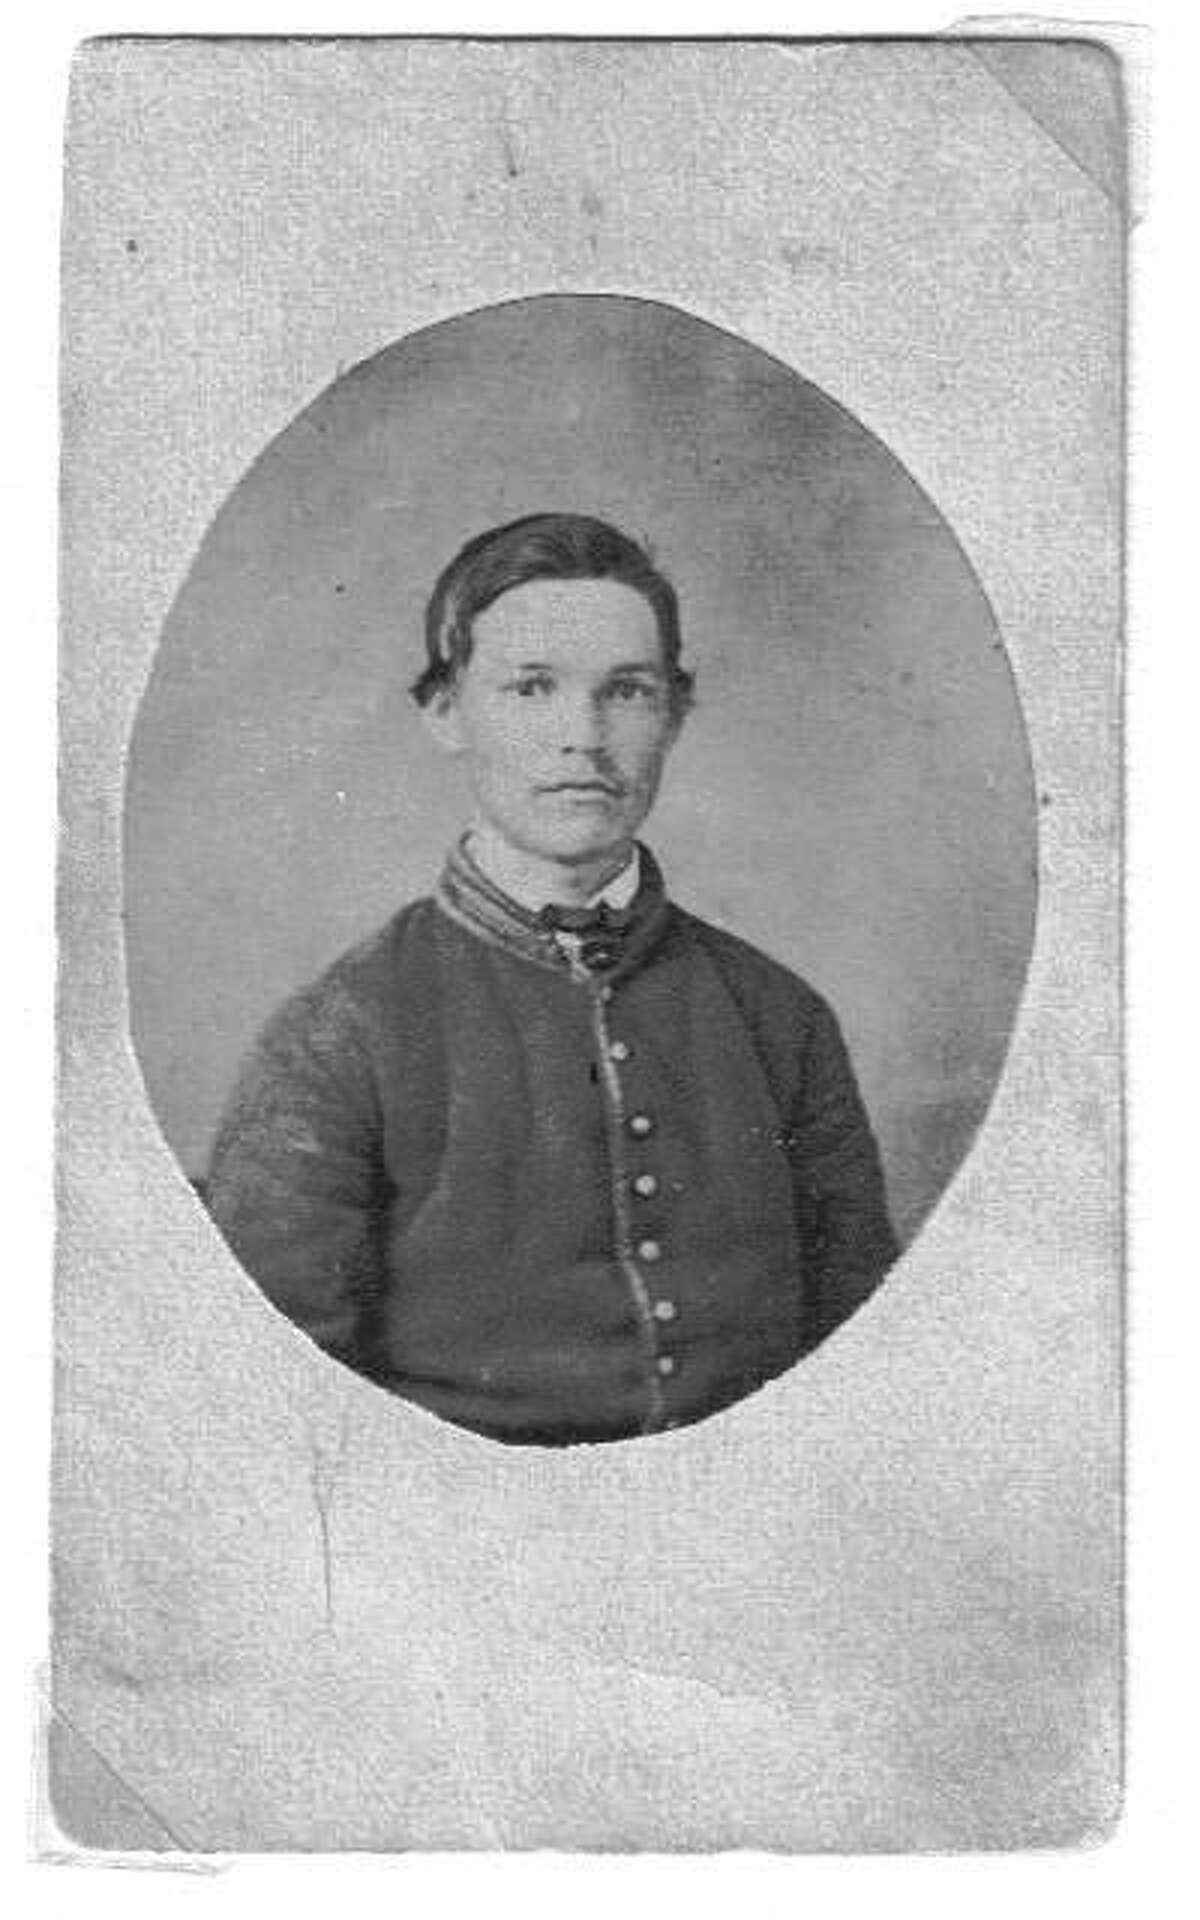 The average Civil War soldier was about 18 years of age but this soldier appears to be no more than 15 years old. Author's Collection.